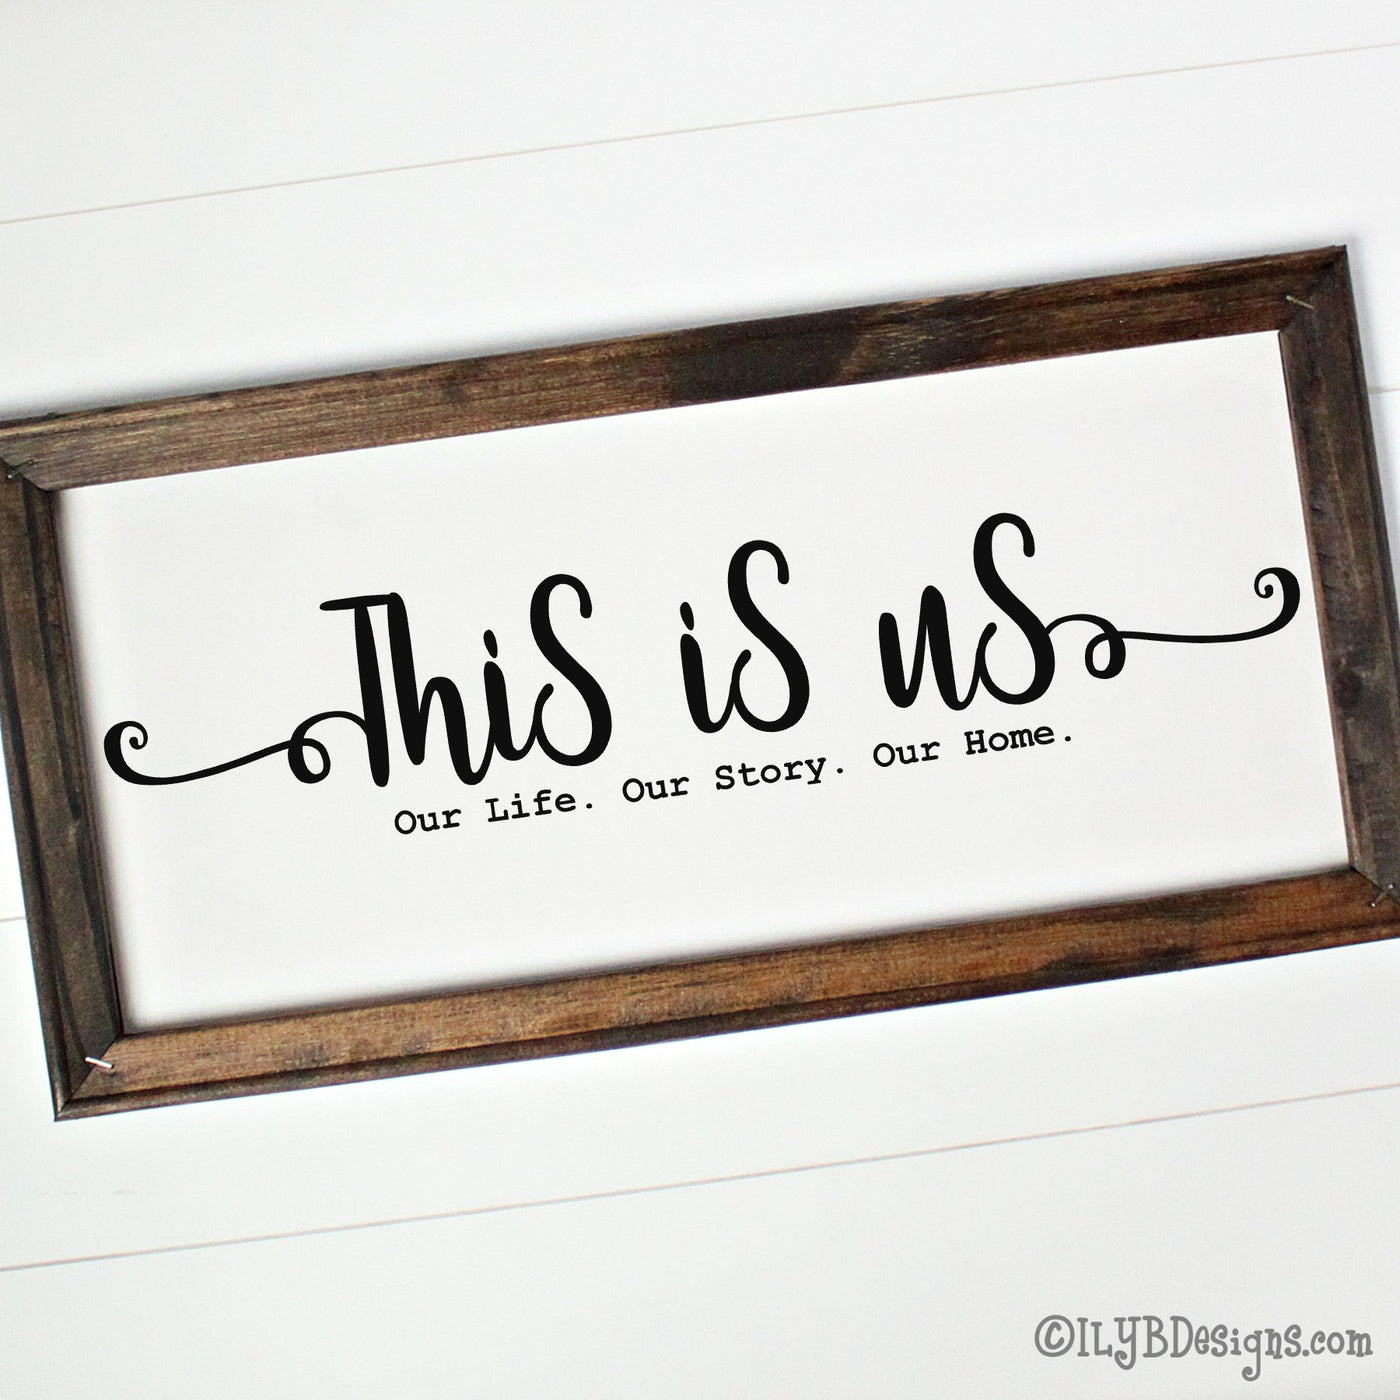 Dark walnut stained 20"x10" framed canvas with "This is us" in a black script font followed by a typewriter font that says, "Our Life. Our Story. Our Home." 